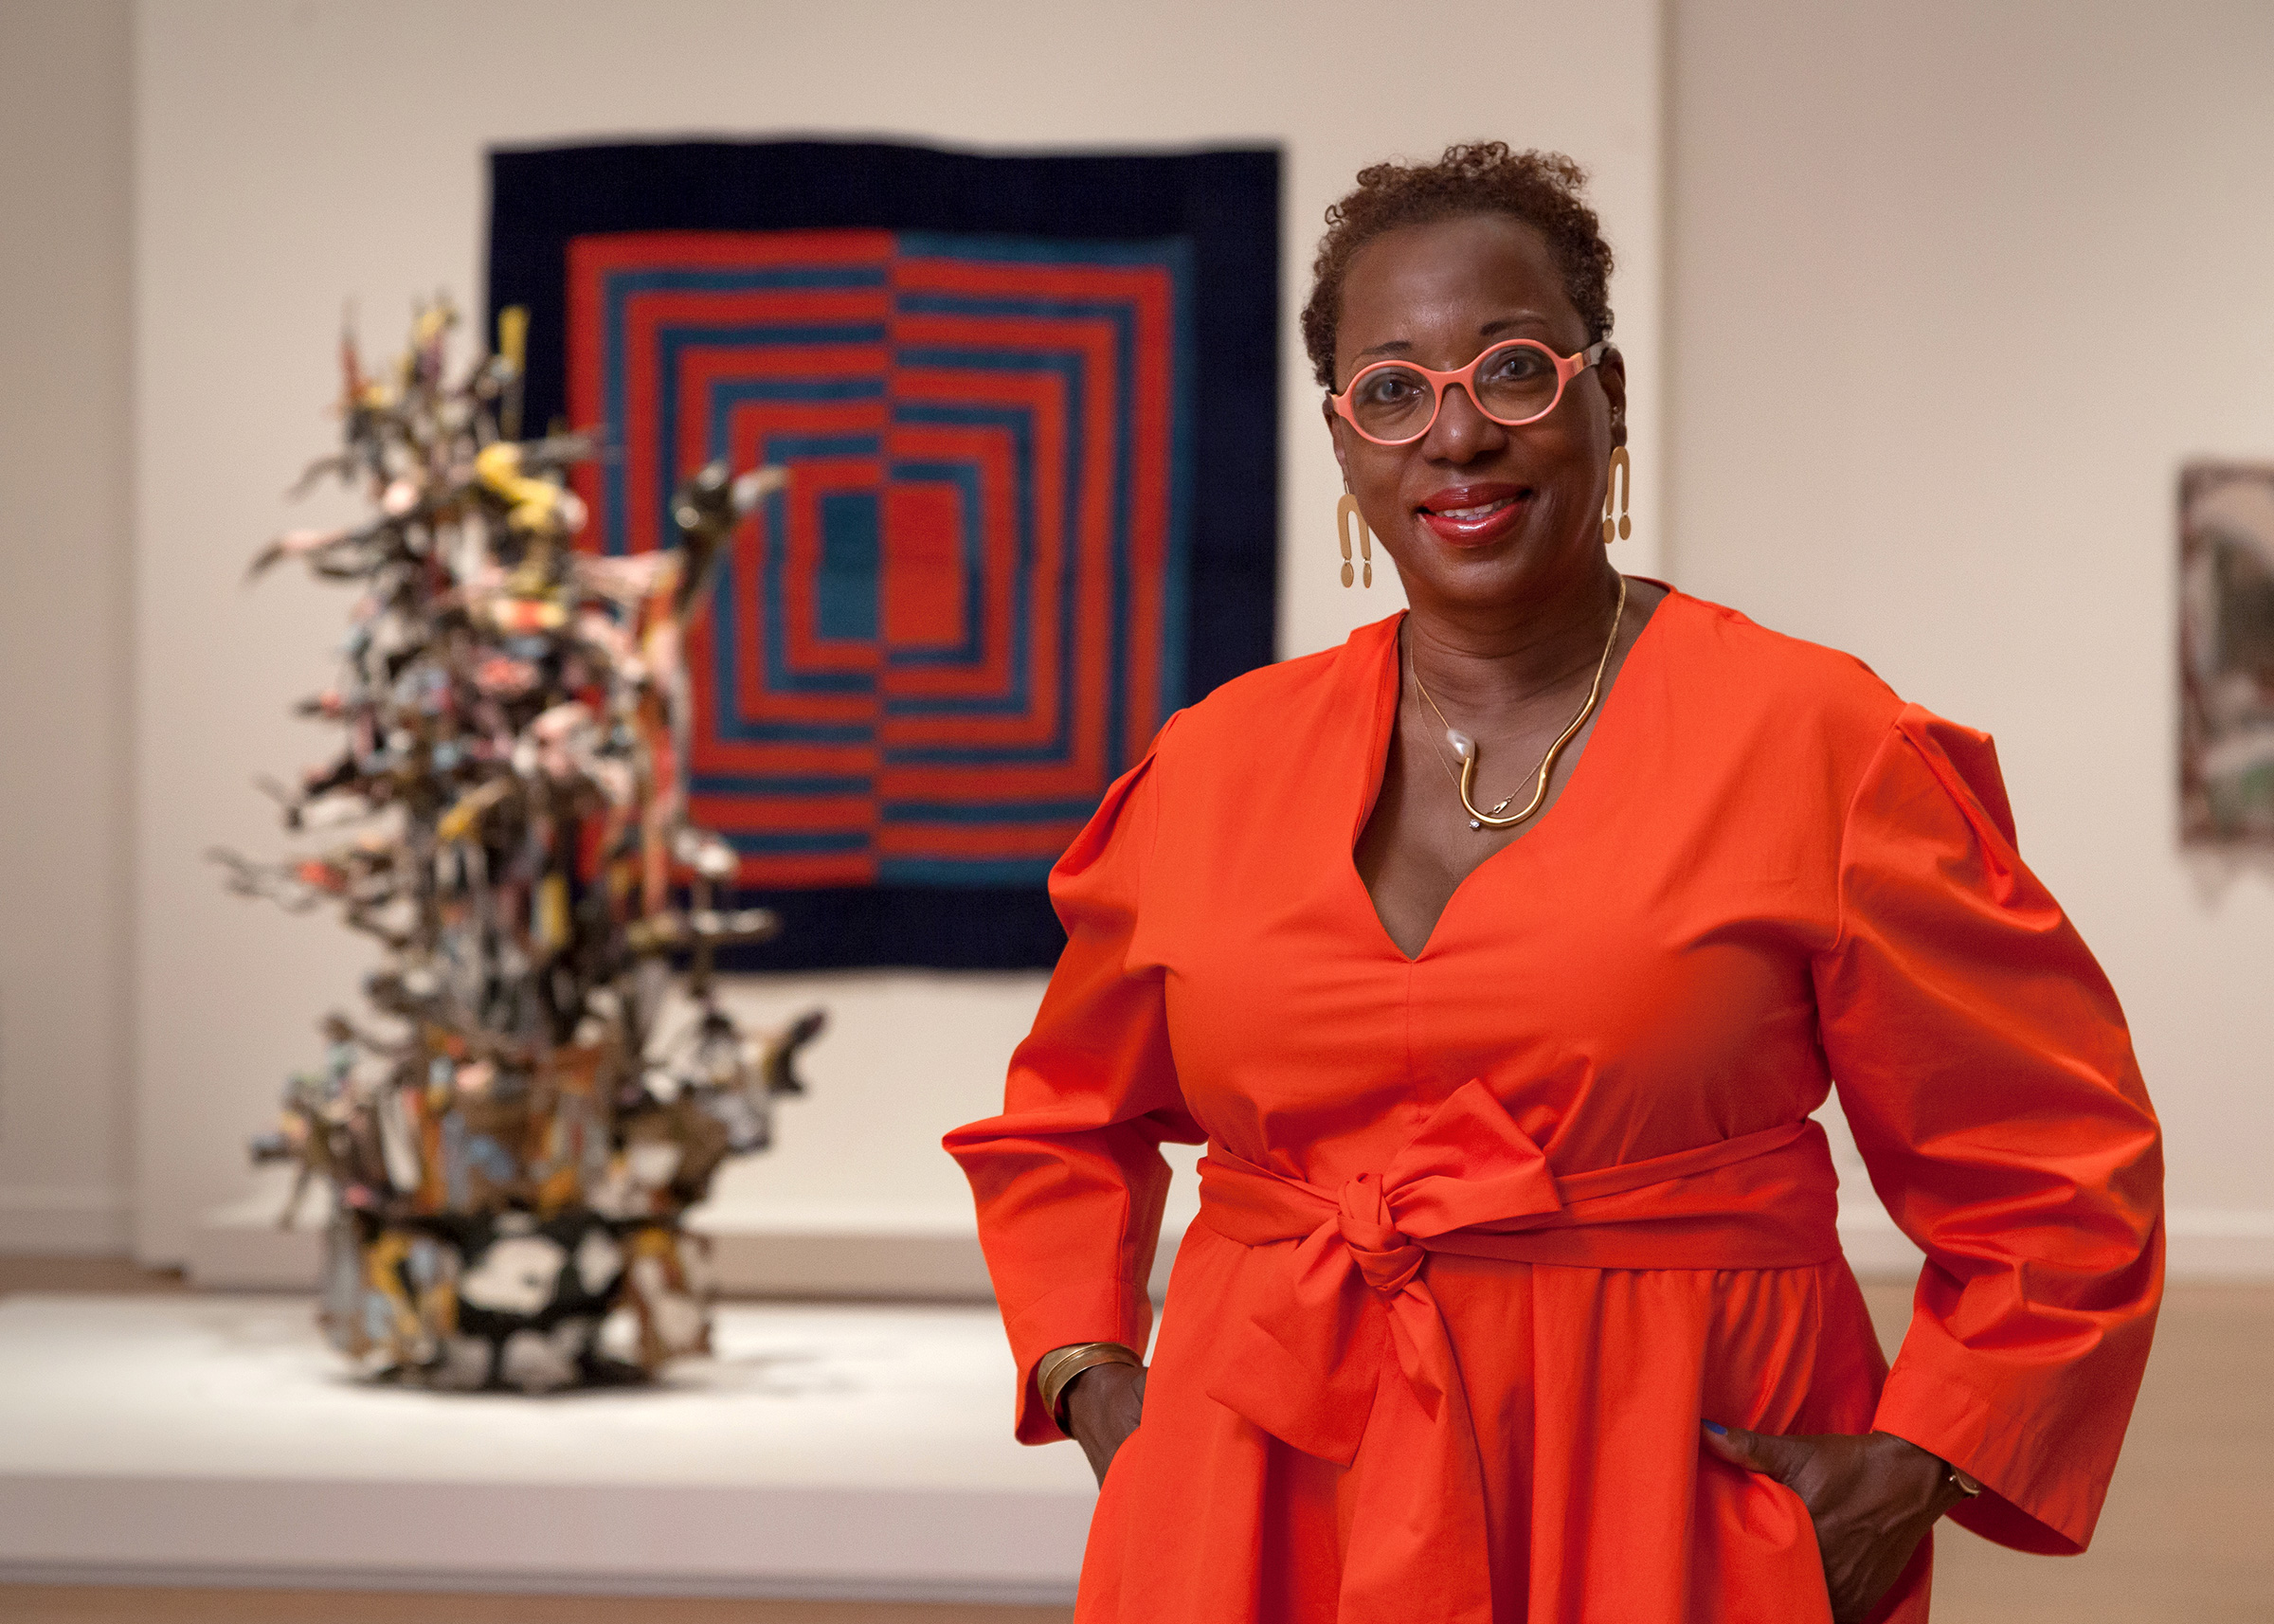 Curator Valerie Cassel Oliver sporting a red dress, gold necklace and earrings, and circular glasses with light red frames. She is standing in front of an artwork on the wall and sculpture on the ground.